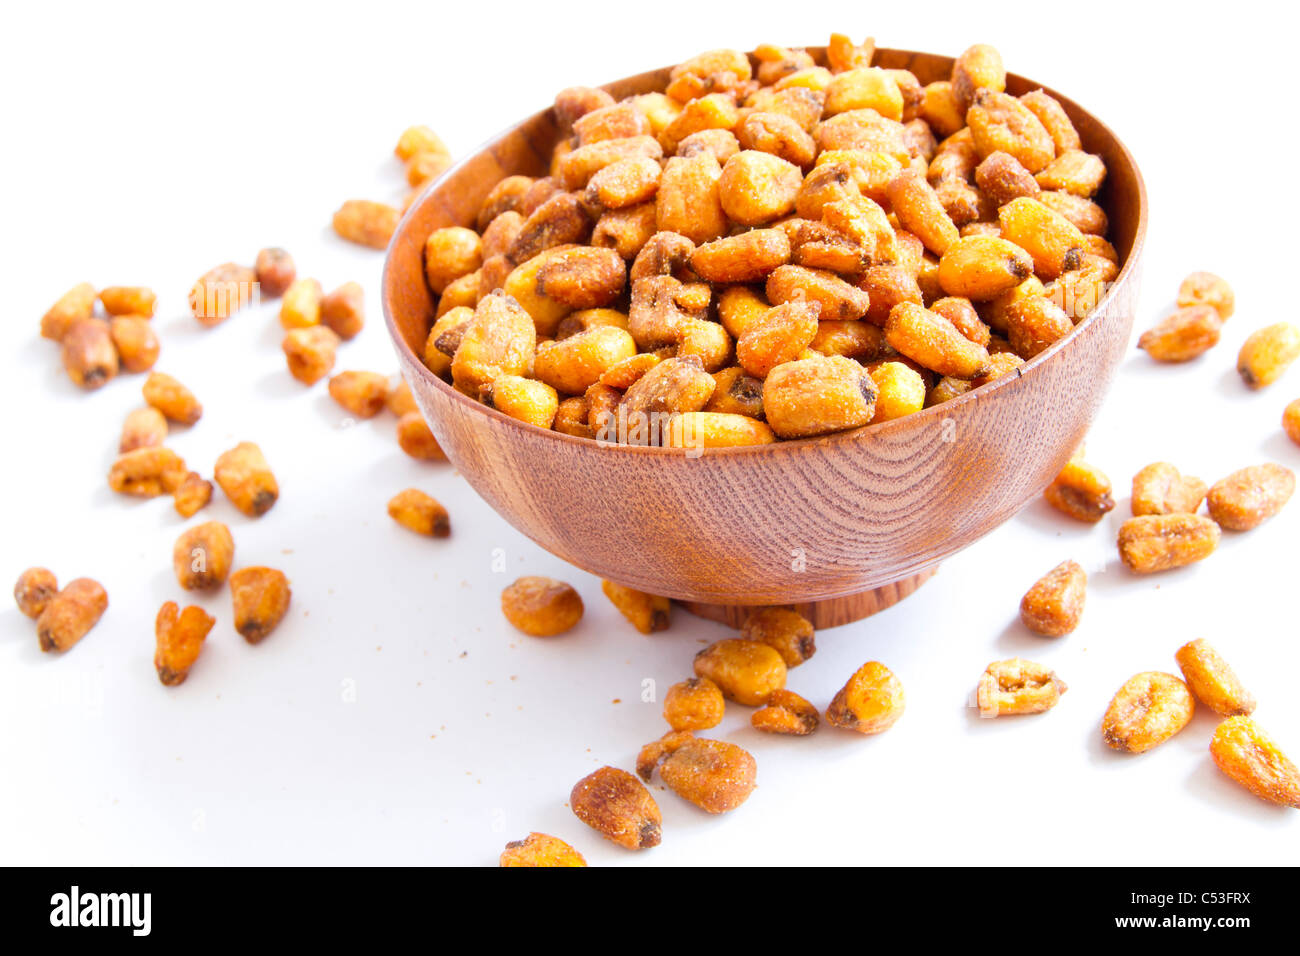 A cherry wood bowl of shelled peanuts on a white background. Stock Photo